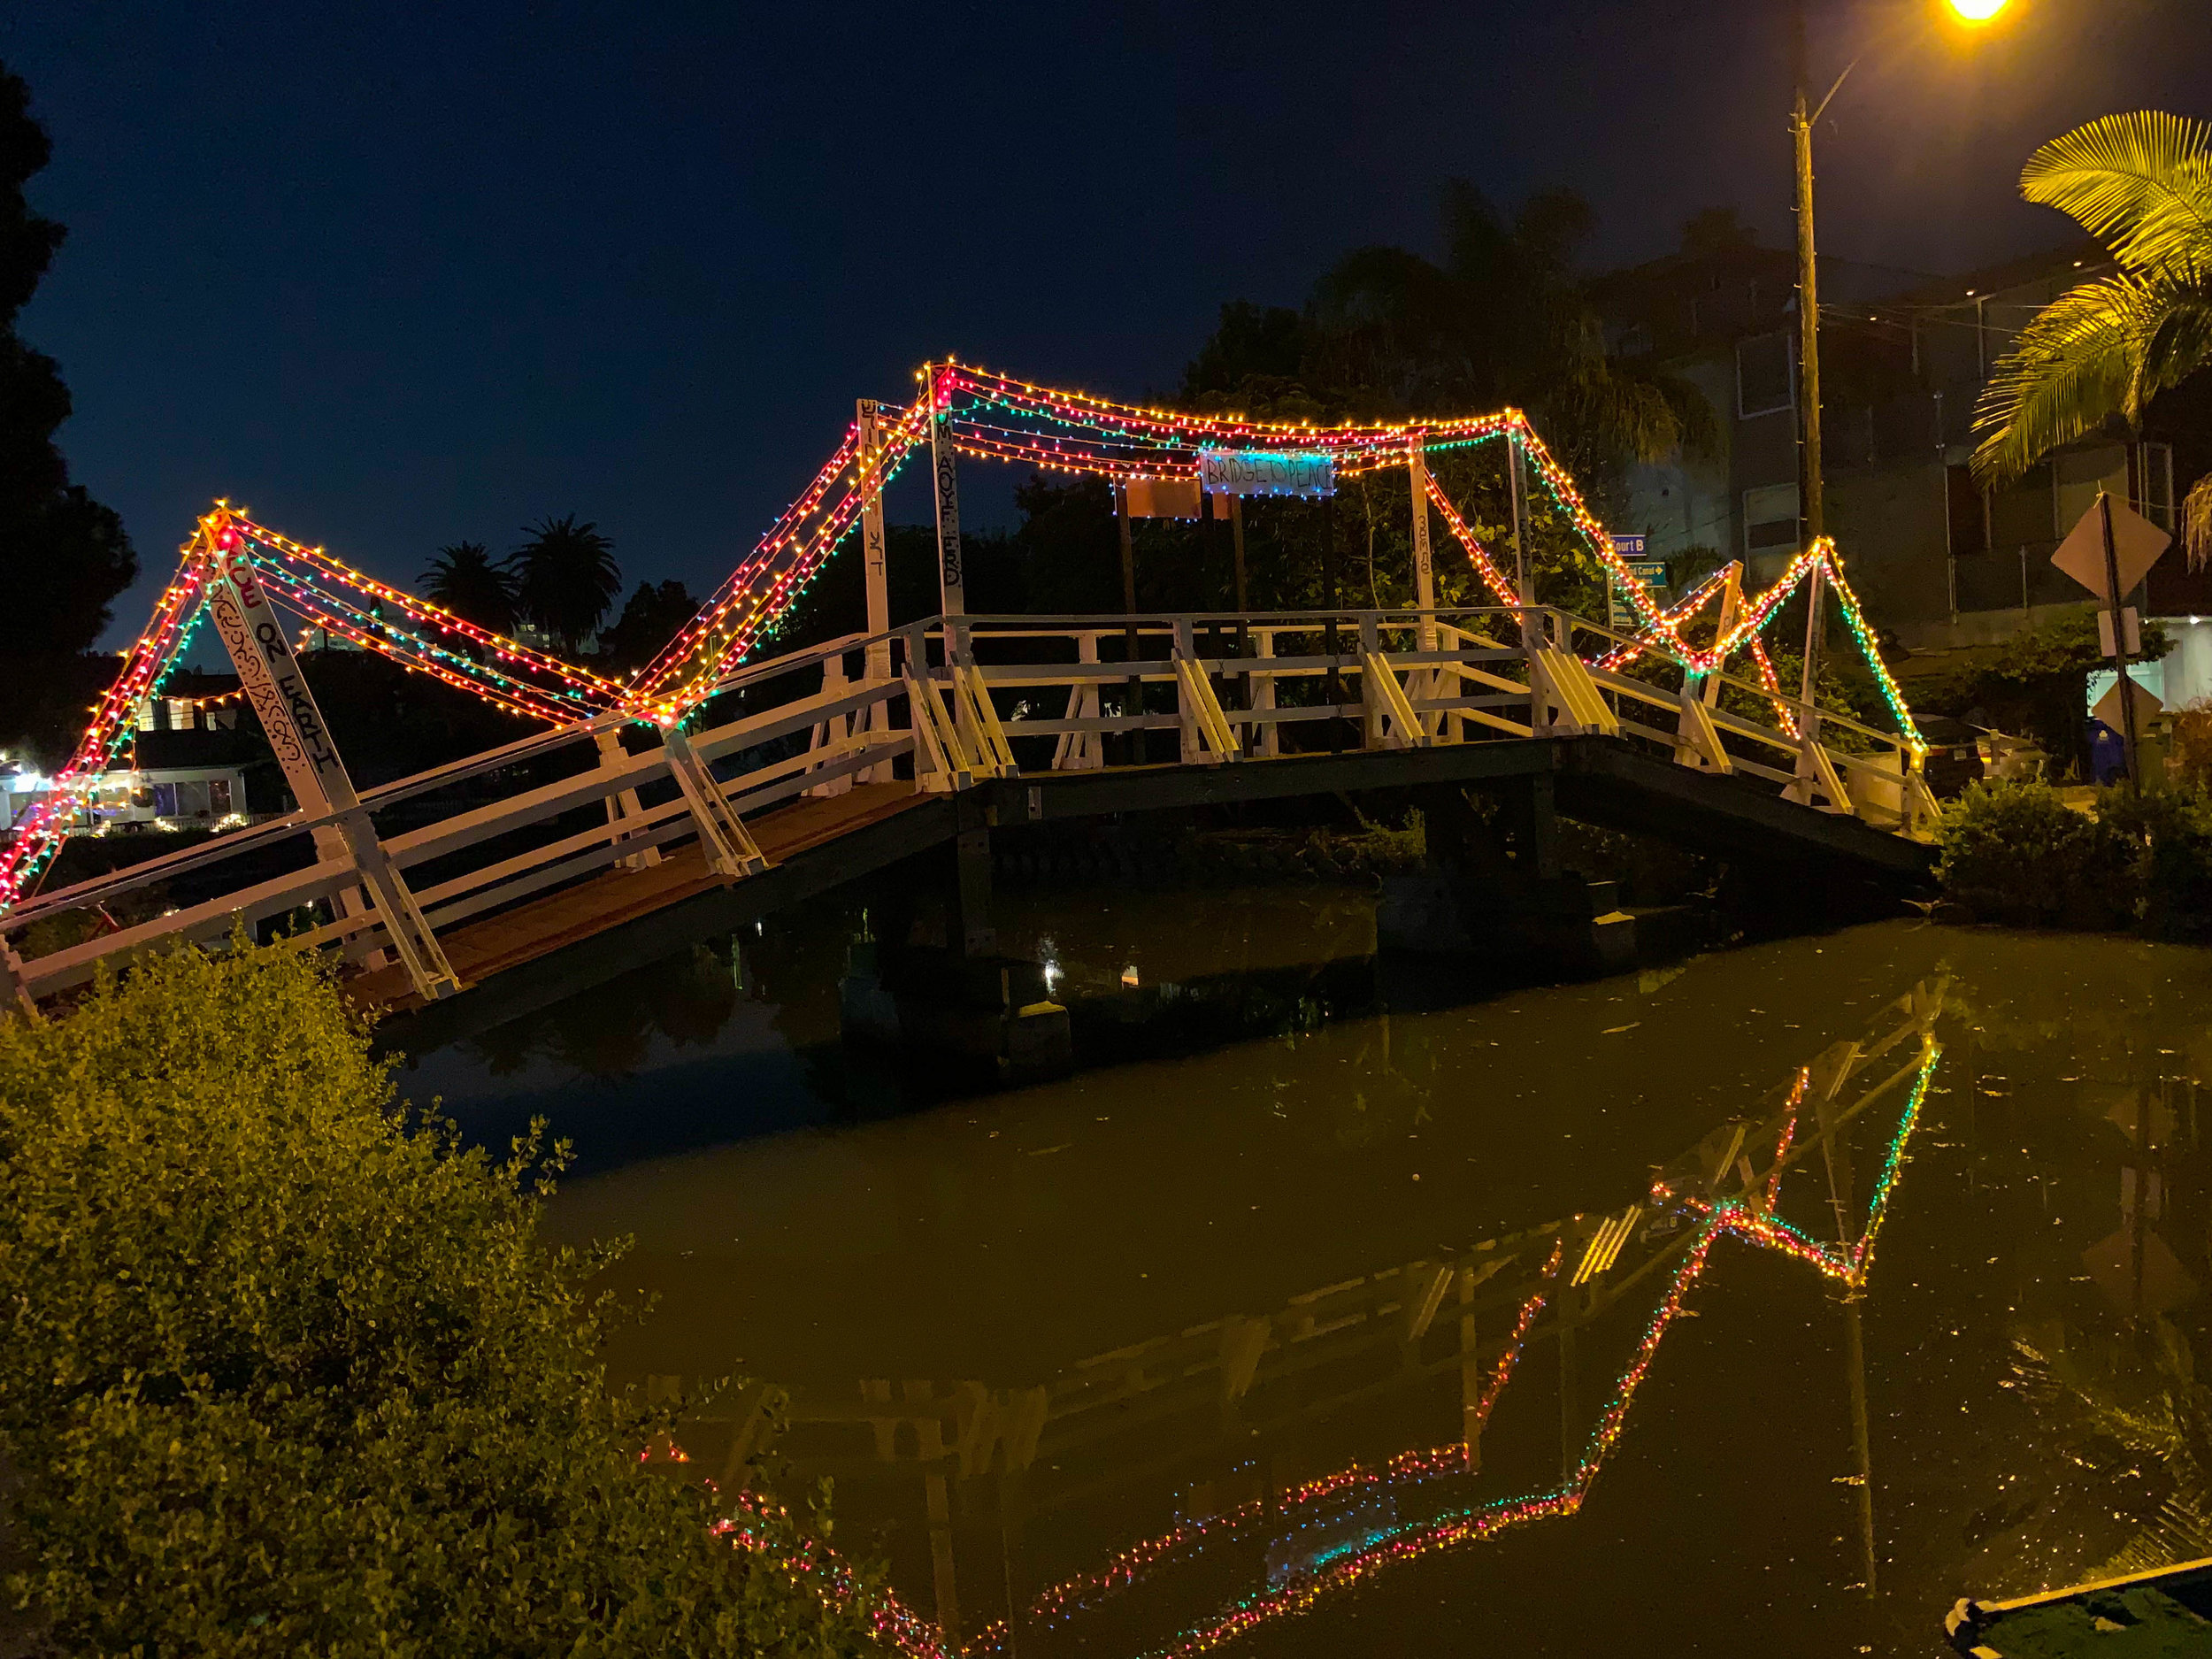 Christmas Lights in Los Angeles Venice Canals - Bridge Decorations